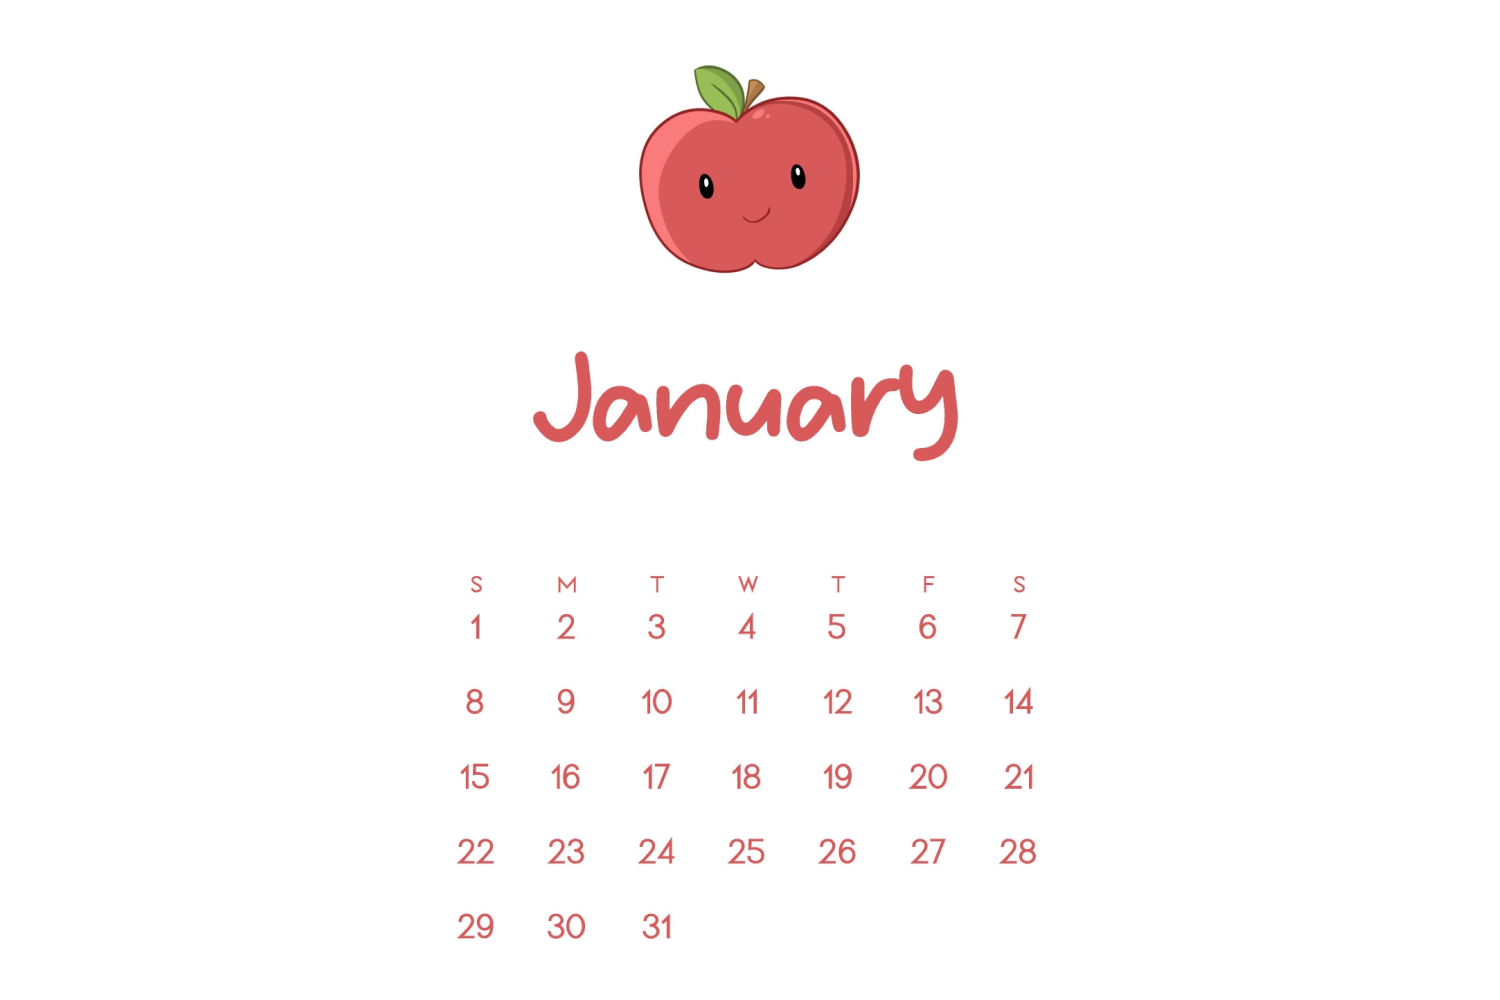 Calendar for january with drawn red apple and cute red color.